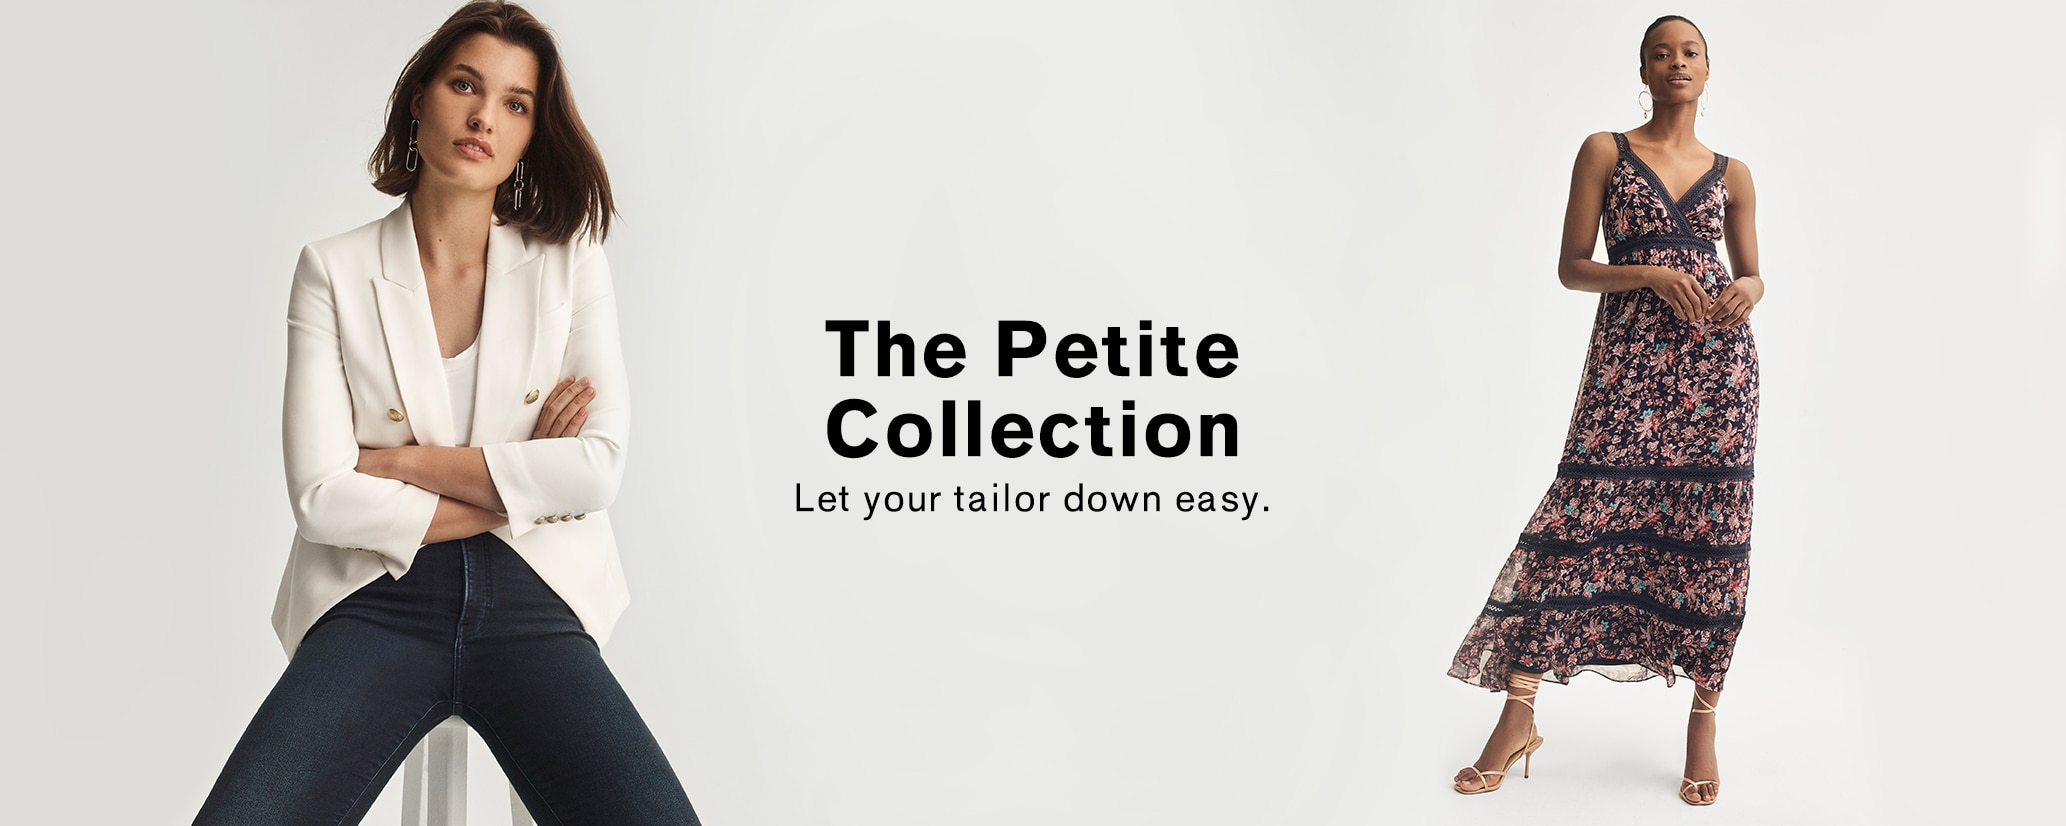 store for petite women's clothes